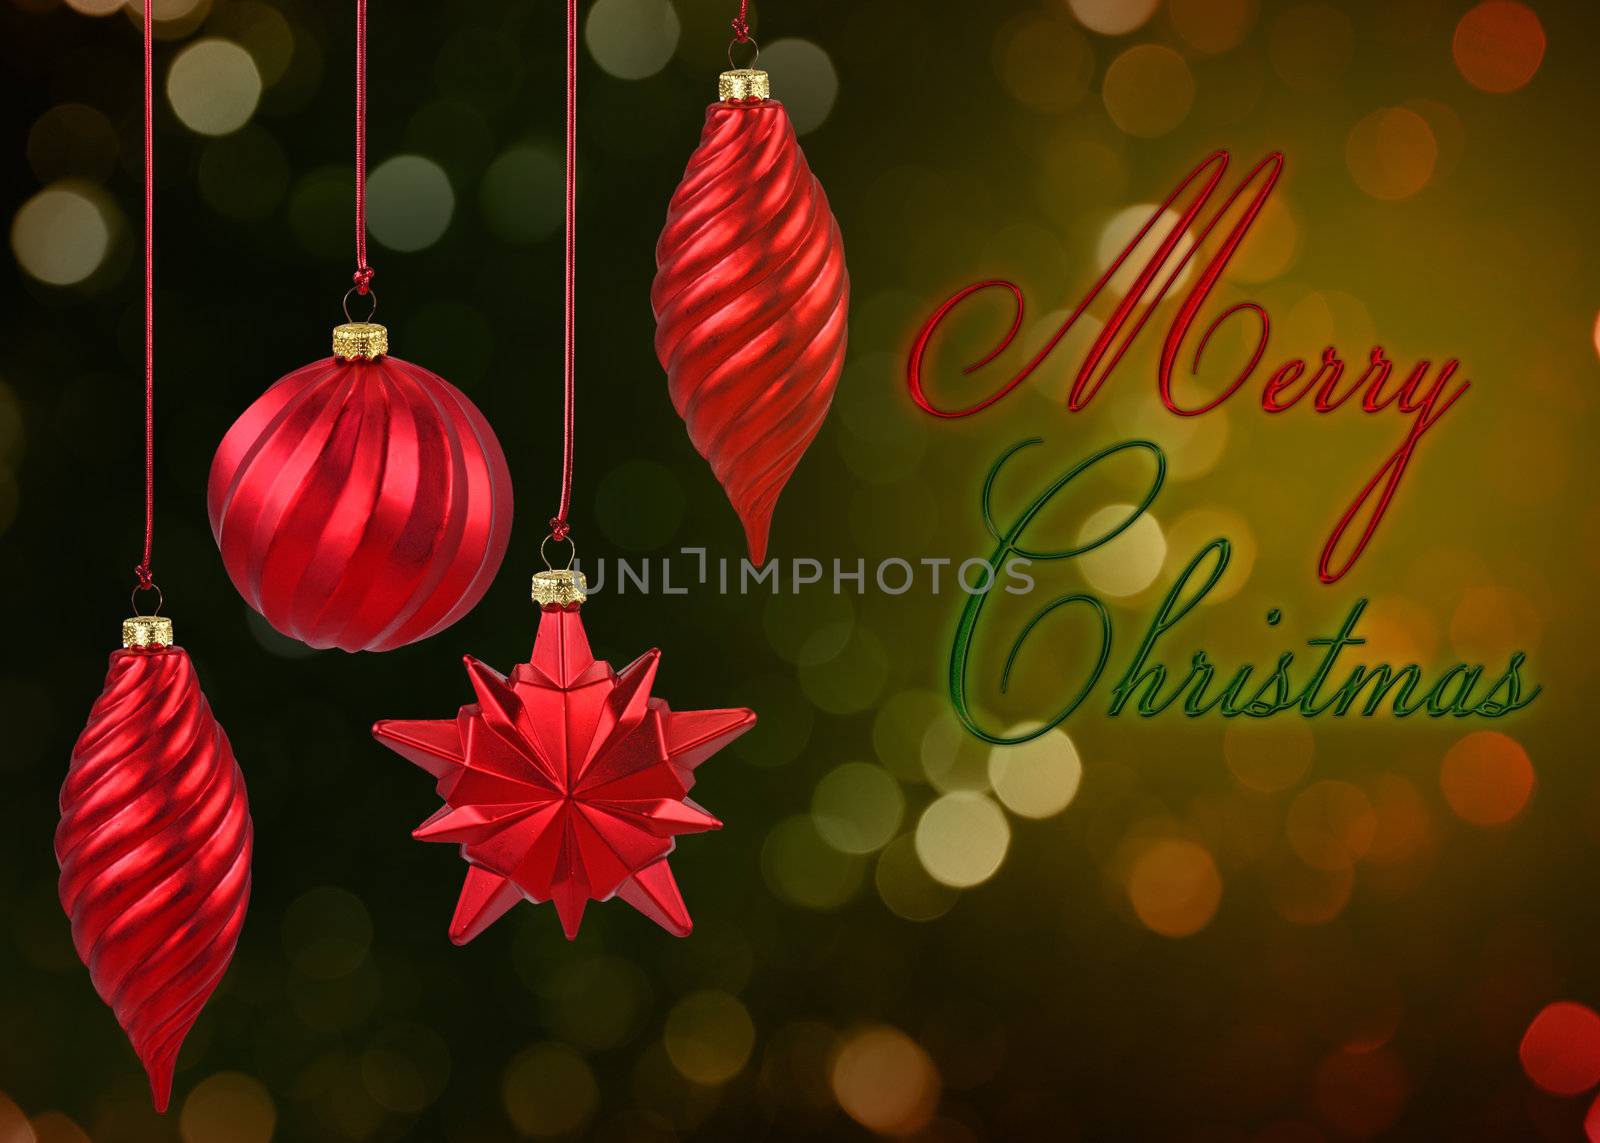 Merry Christmas illustration: 4 red Christmas baubles on a red-green bokeh background.